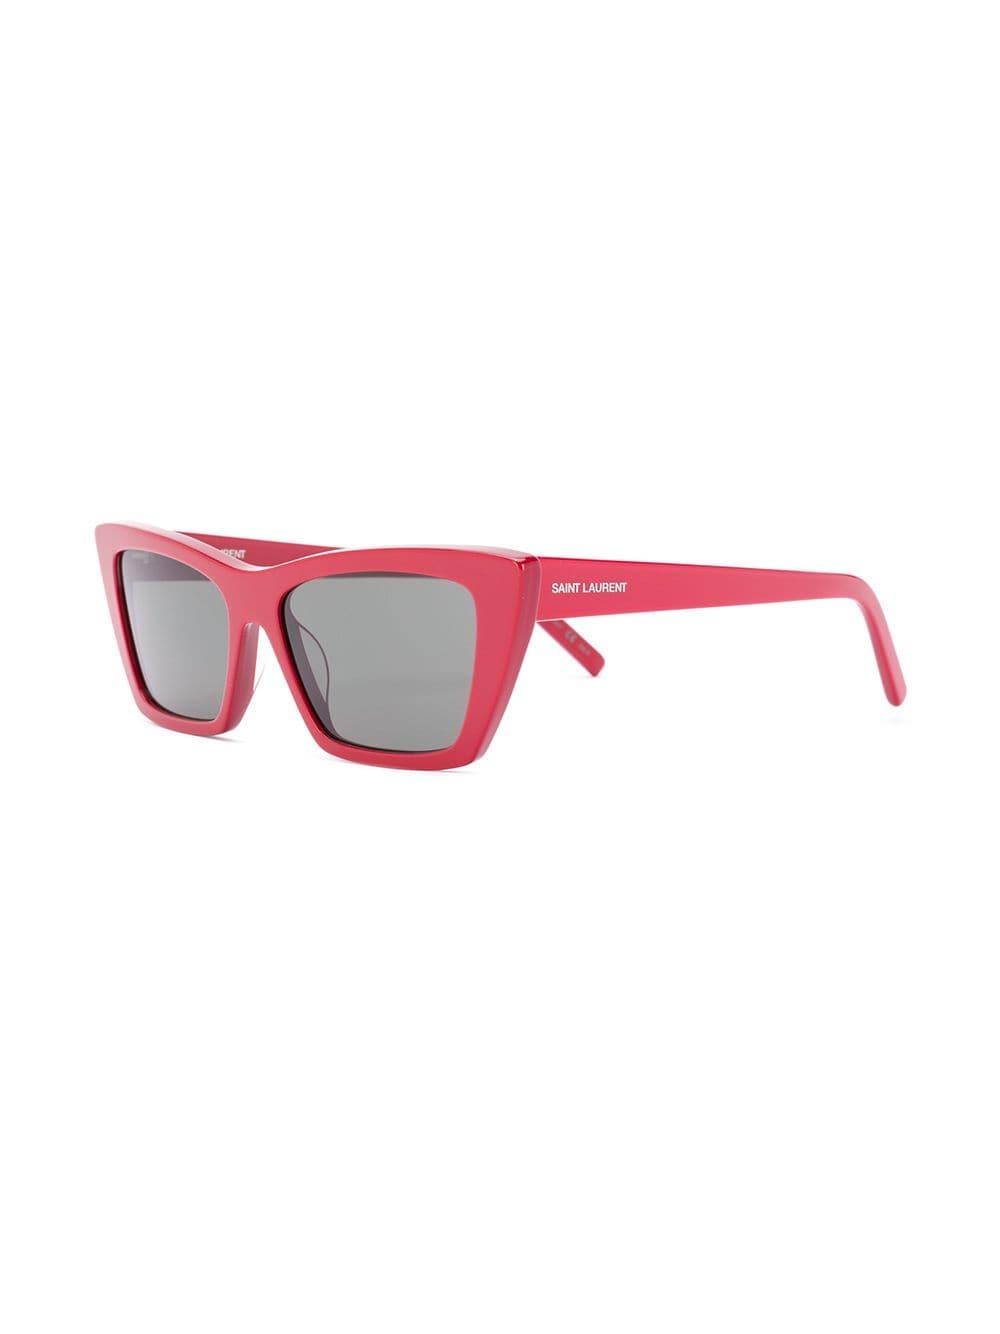 Saint Laurent New Wave Sl 276 Sunglasses in Red | Lyst